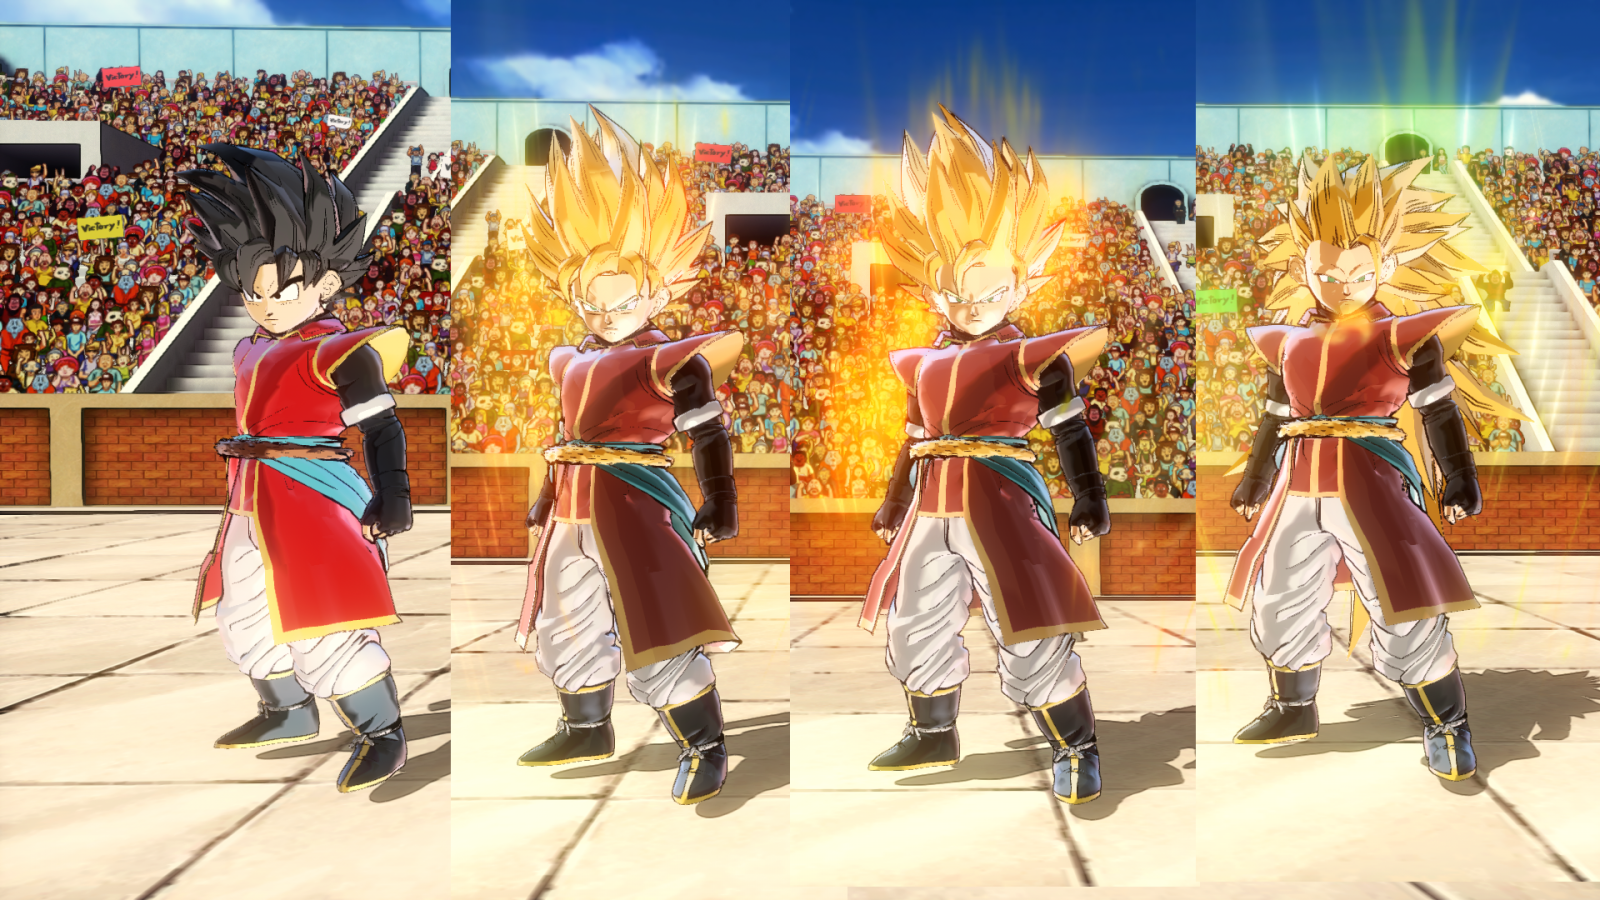 Super Dragon Ball Heroes Modpack – Xenoverse Mods